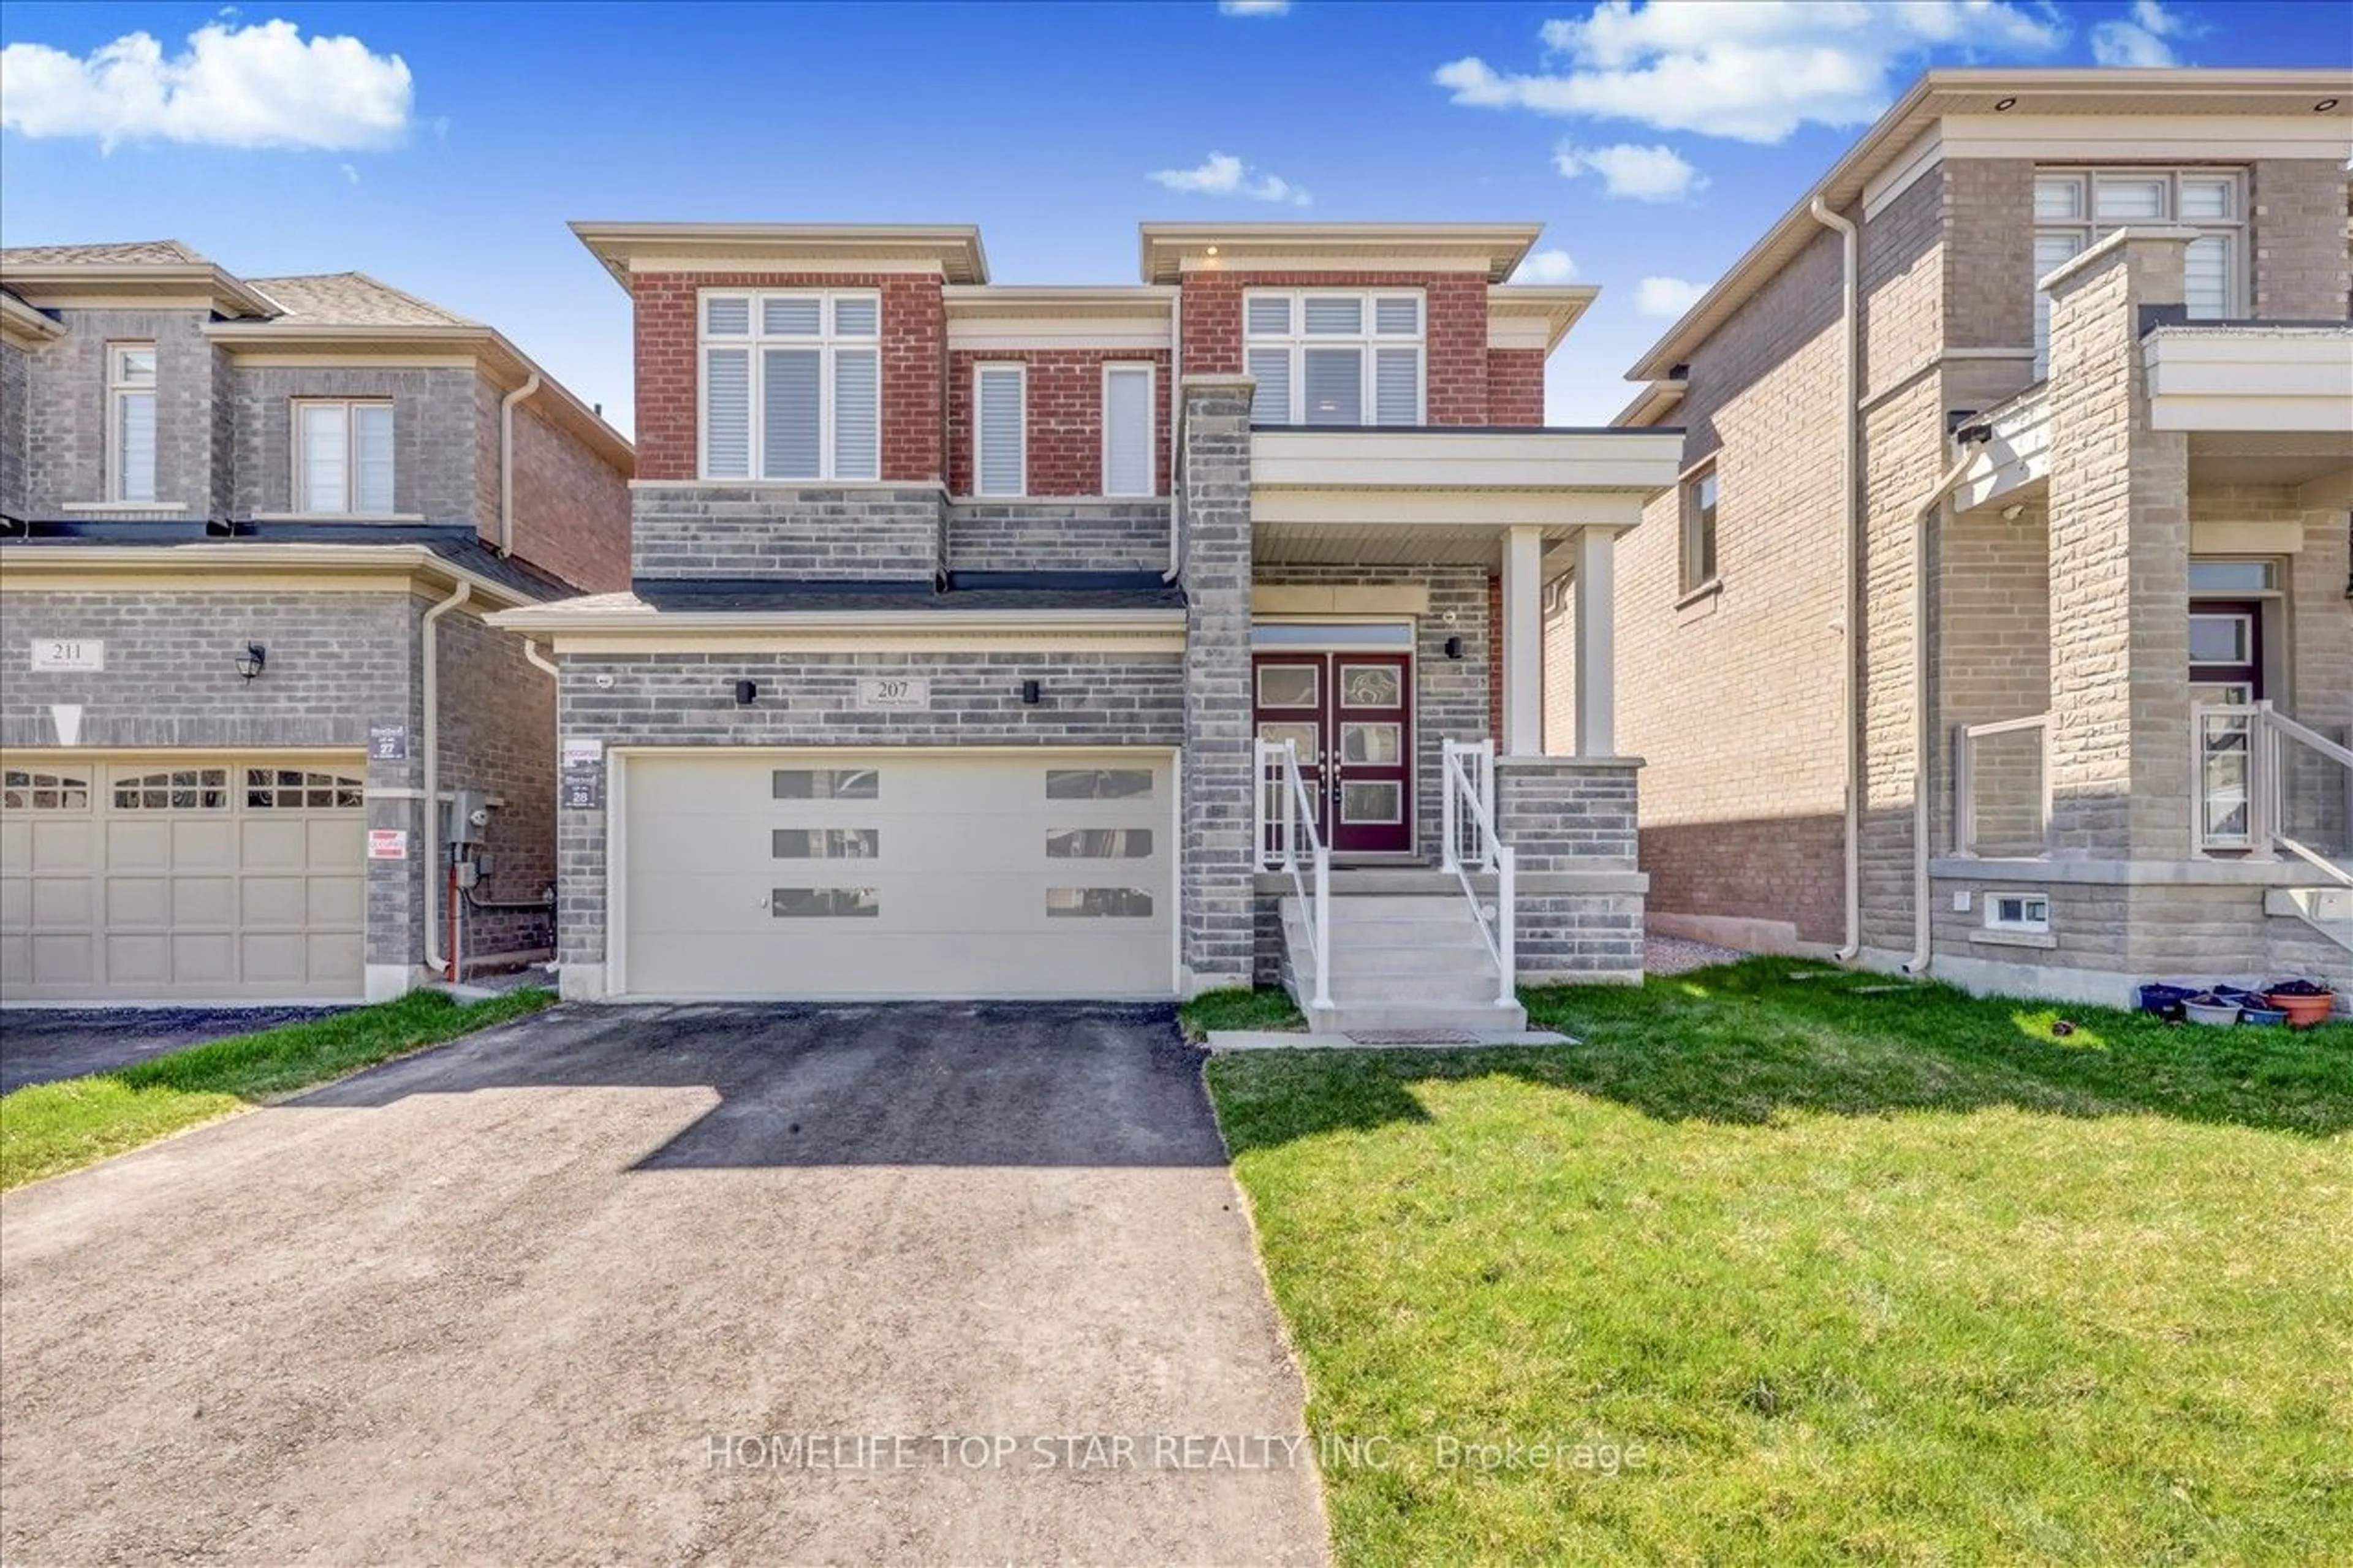 Home with brick exterior material for 207 Wesmina Ave, Whitchurch-Stouffville Ontario L4A 5A2